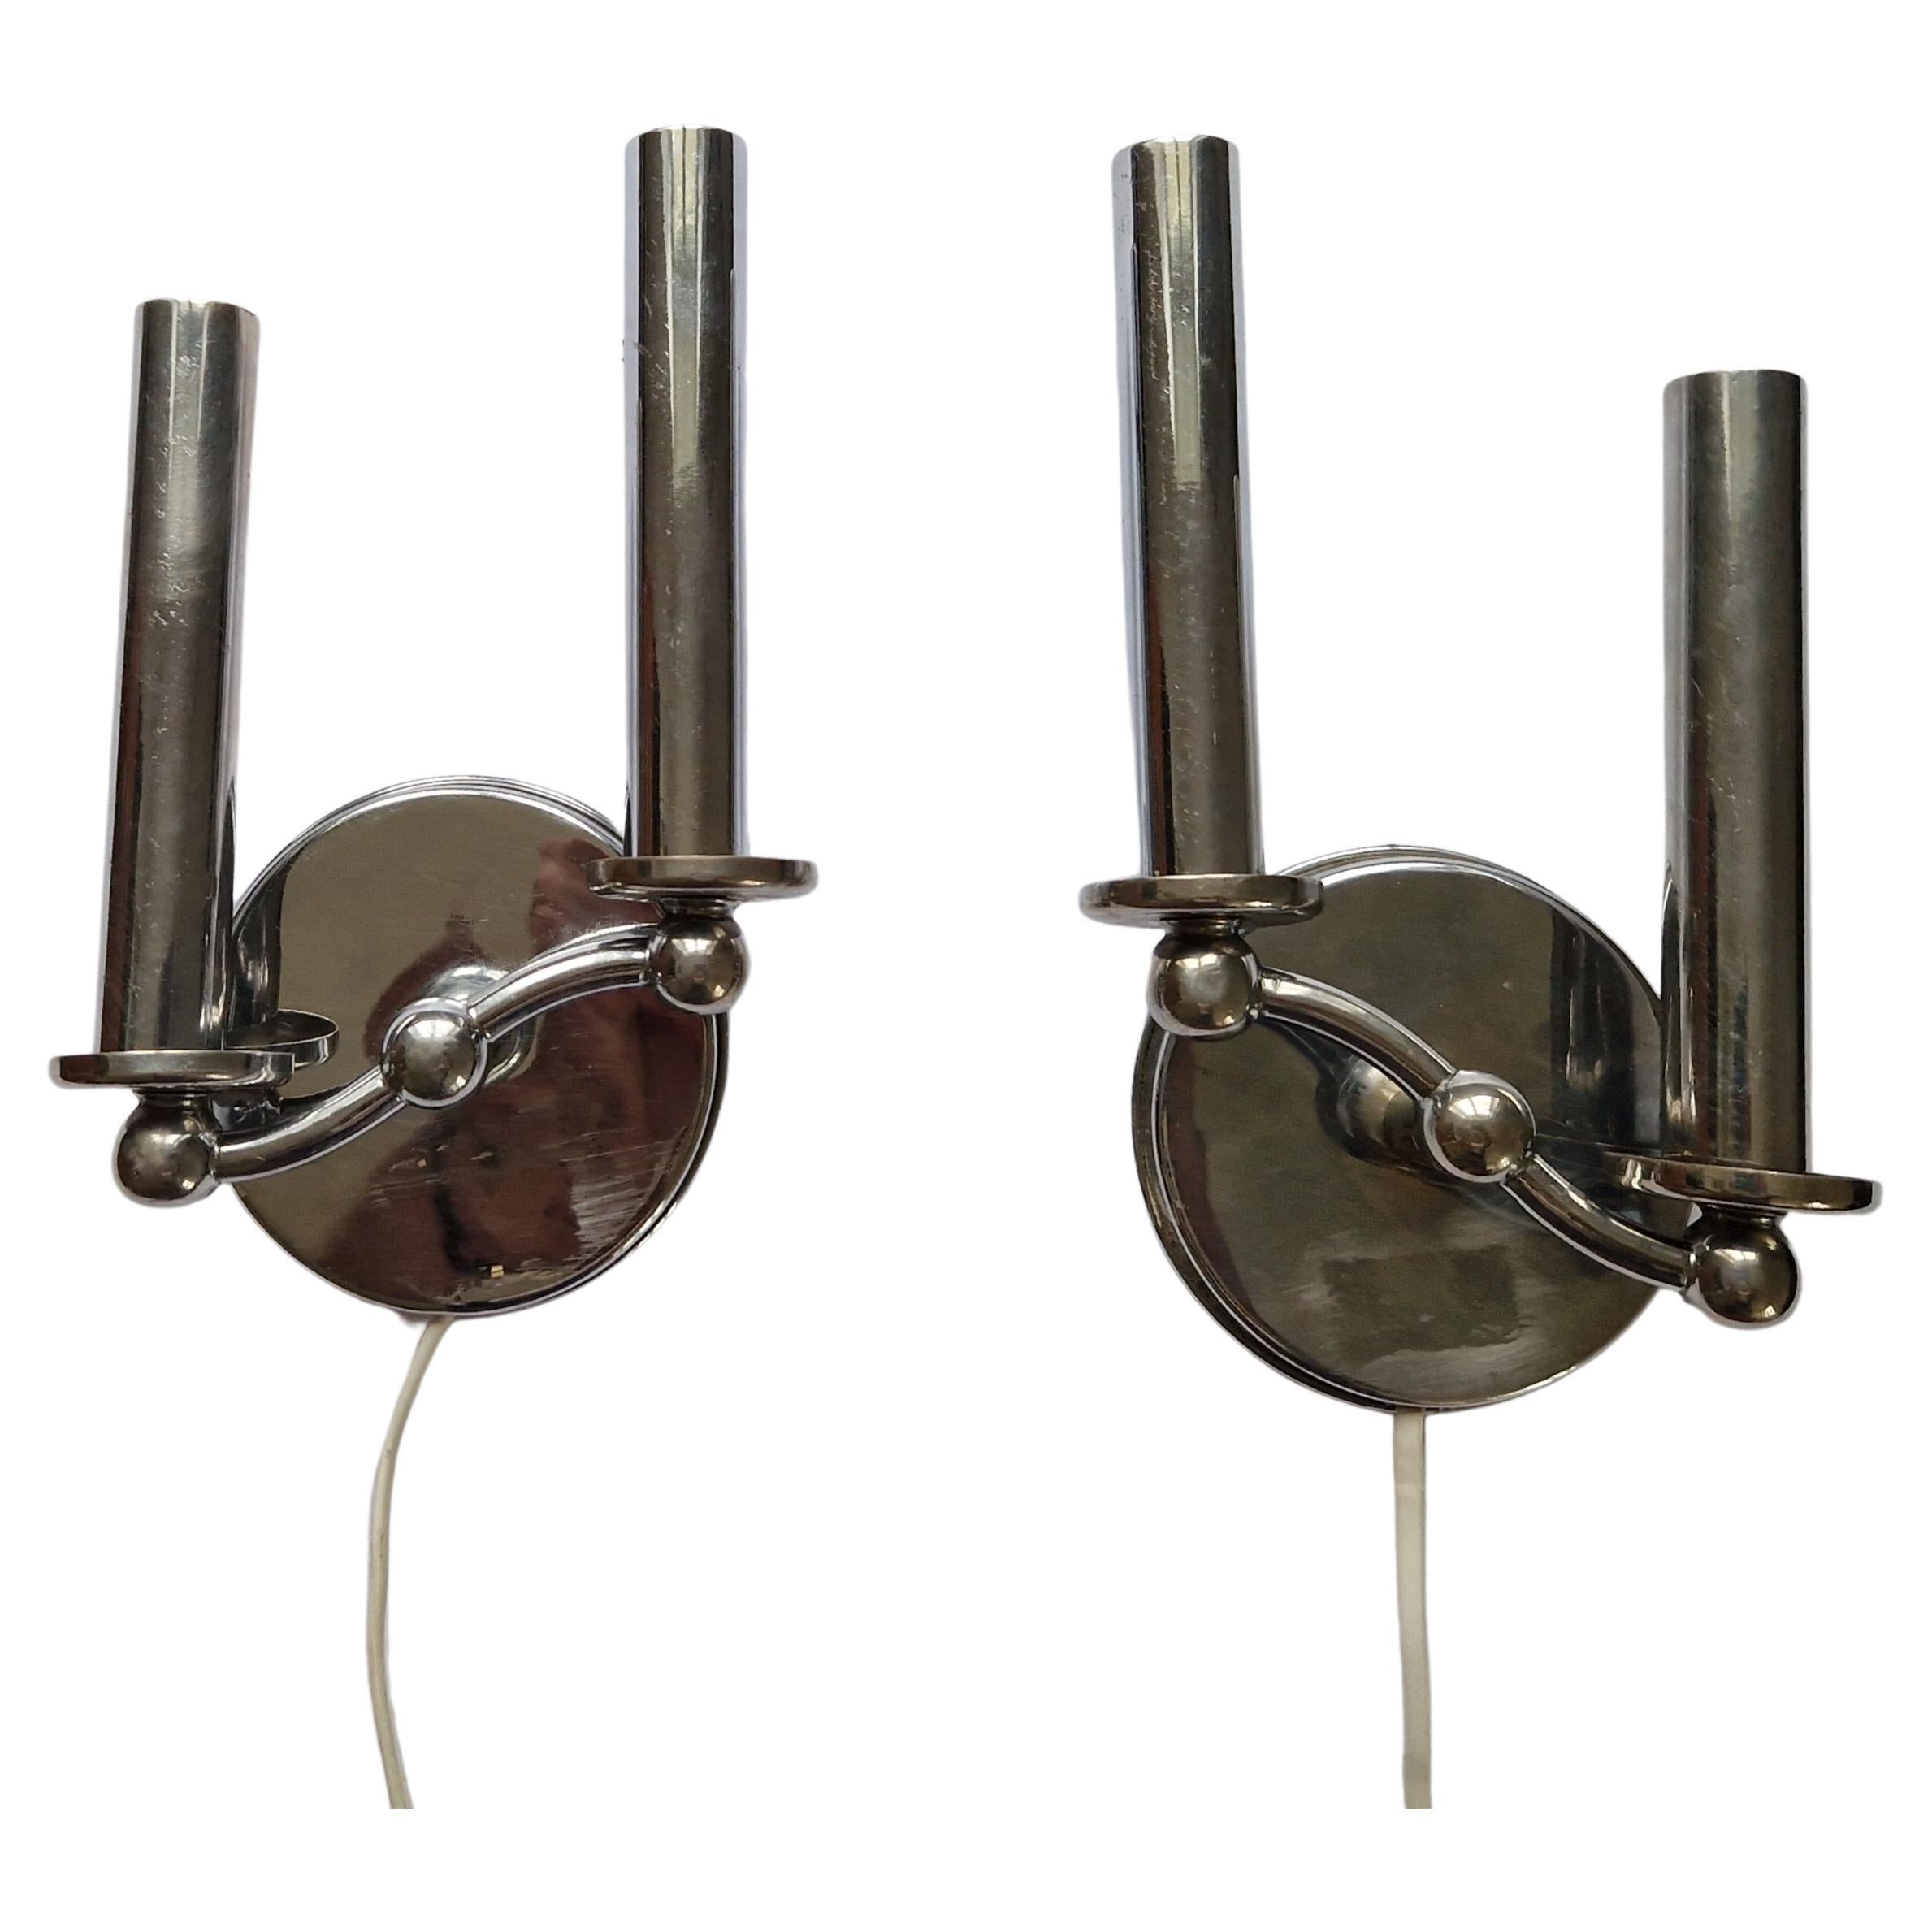 Pair of Rare Chrome Art Deco / Functionalism Wall Lamps, 1930s